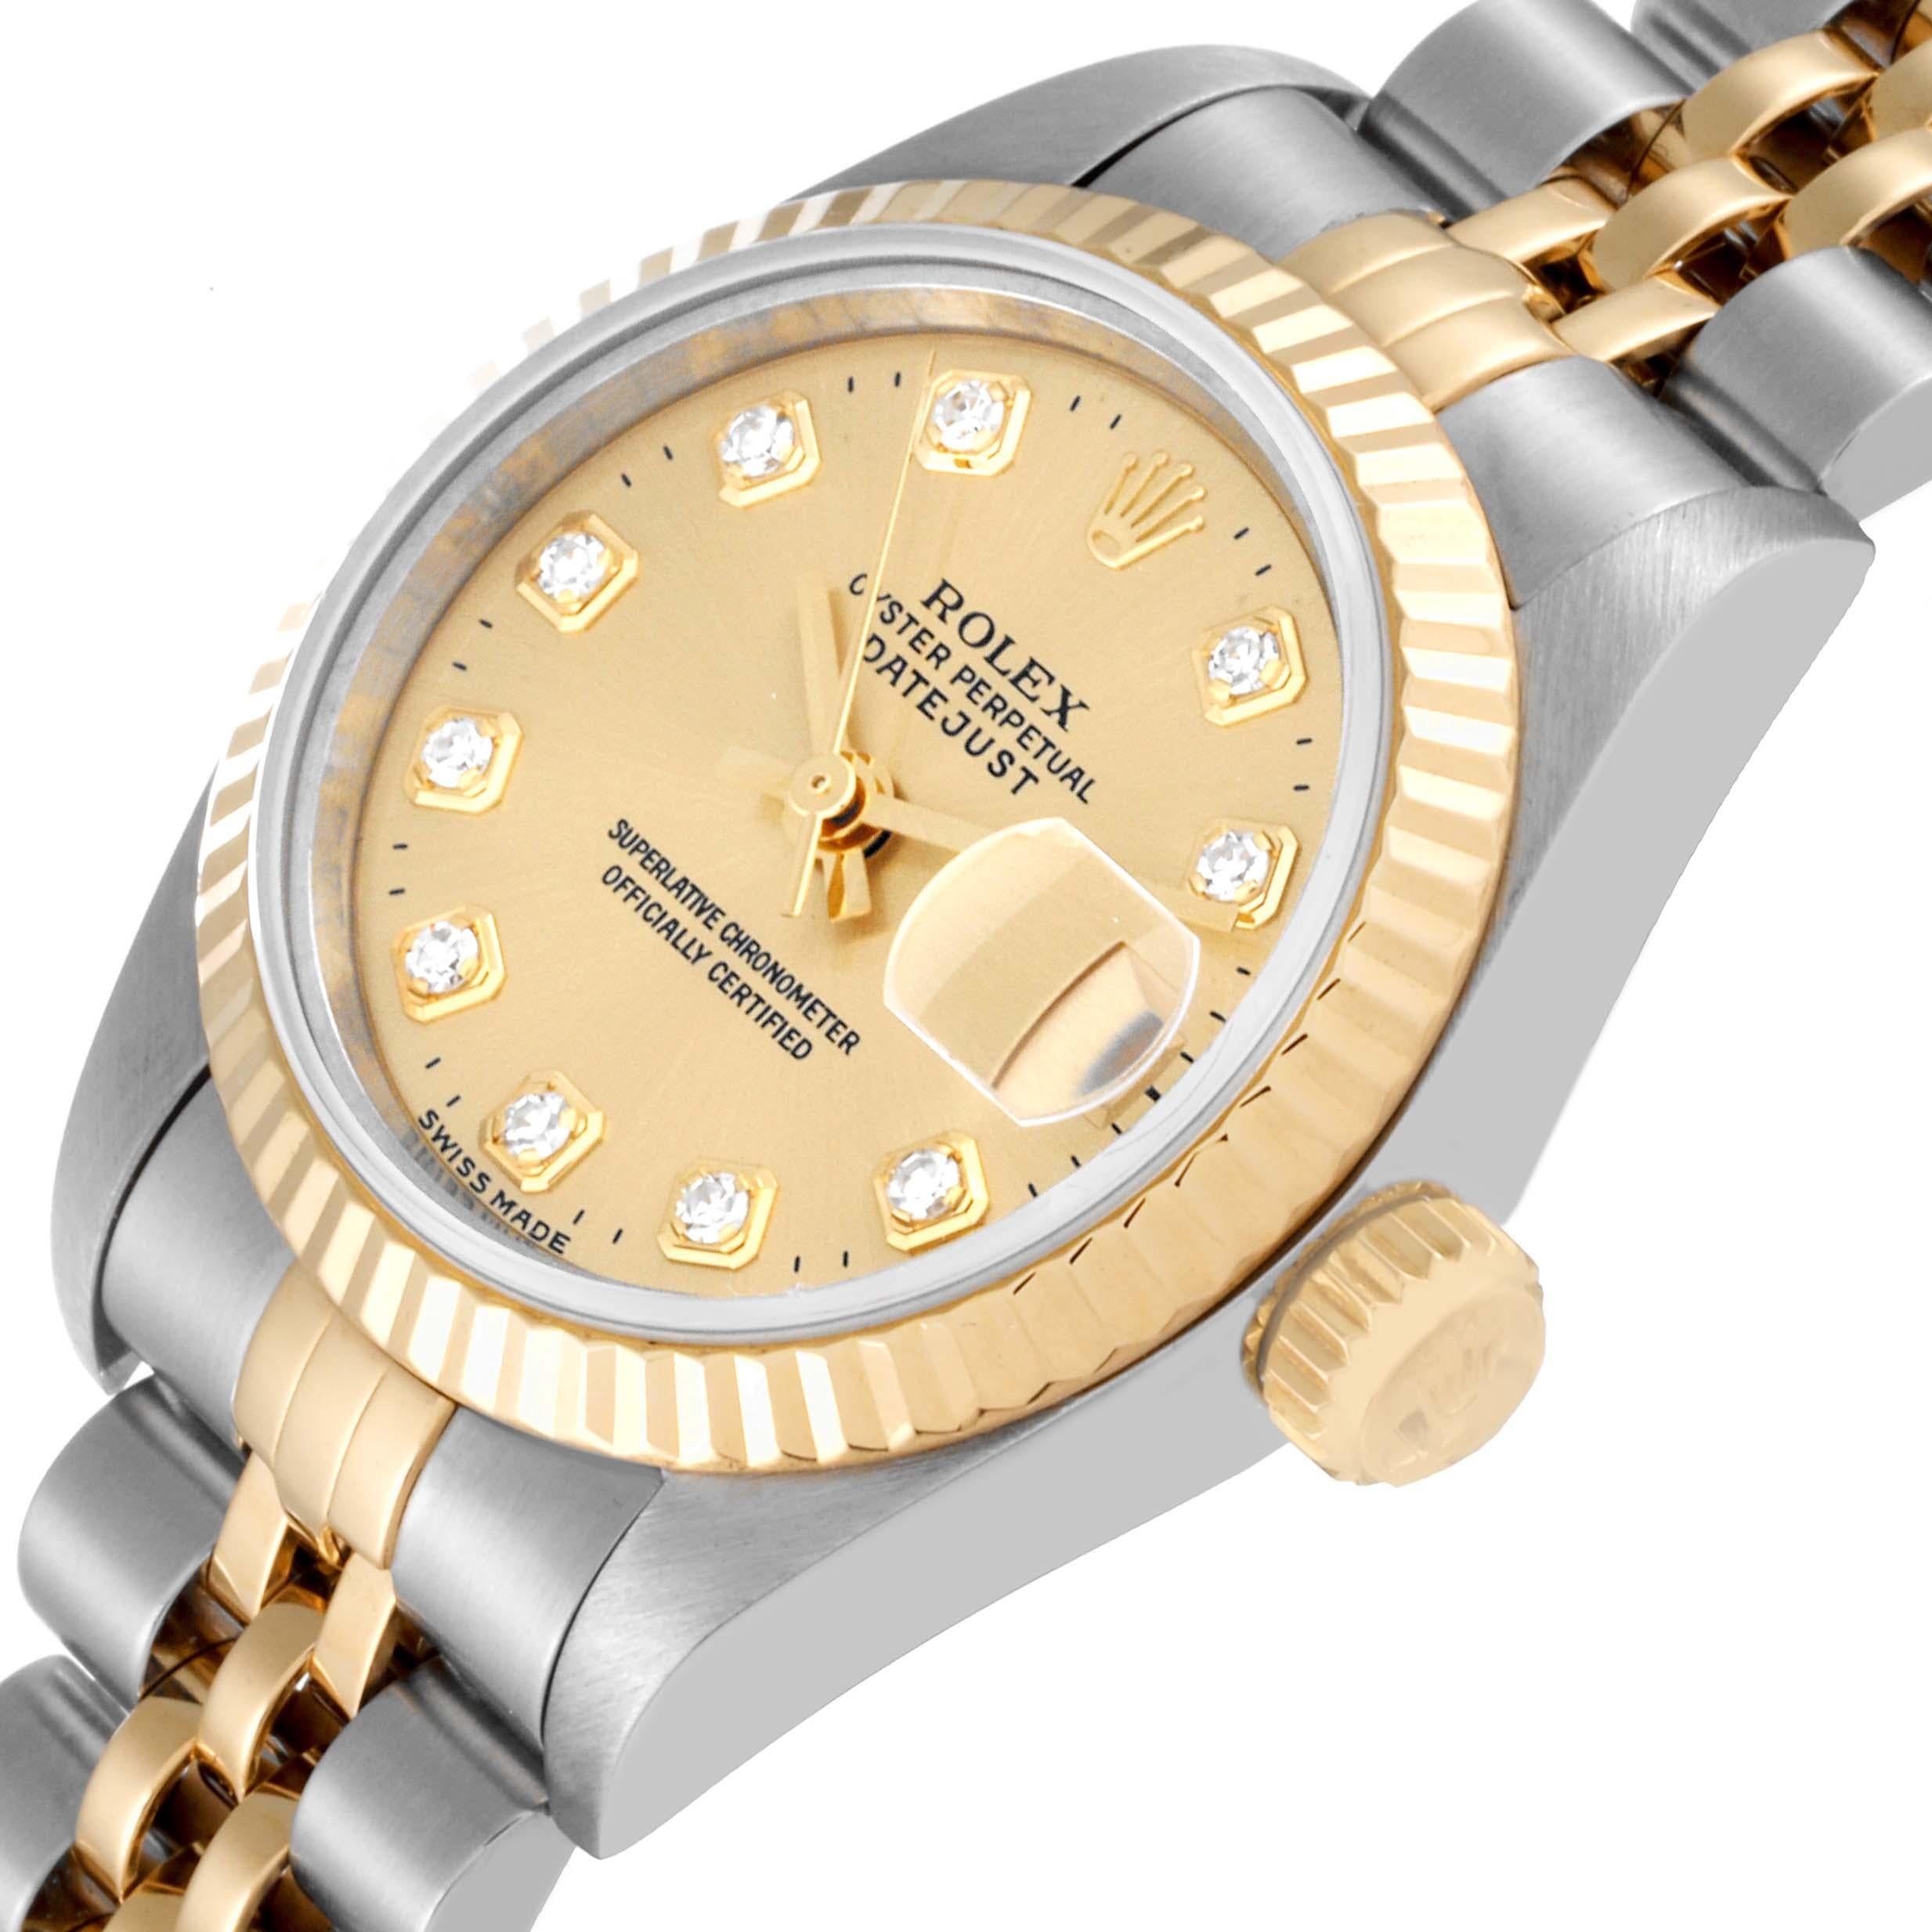 Rolex Datejust Steel Yellow Gold Diamond Dial Ladies Watch 69173 Box Papers 1